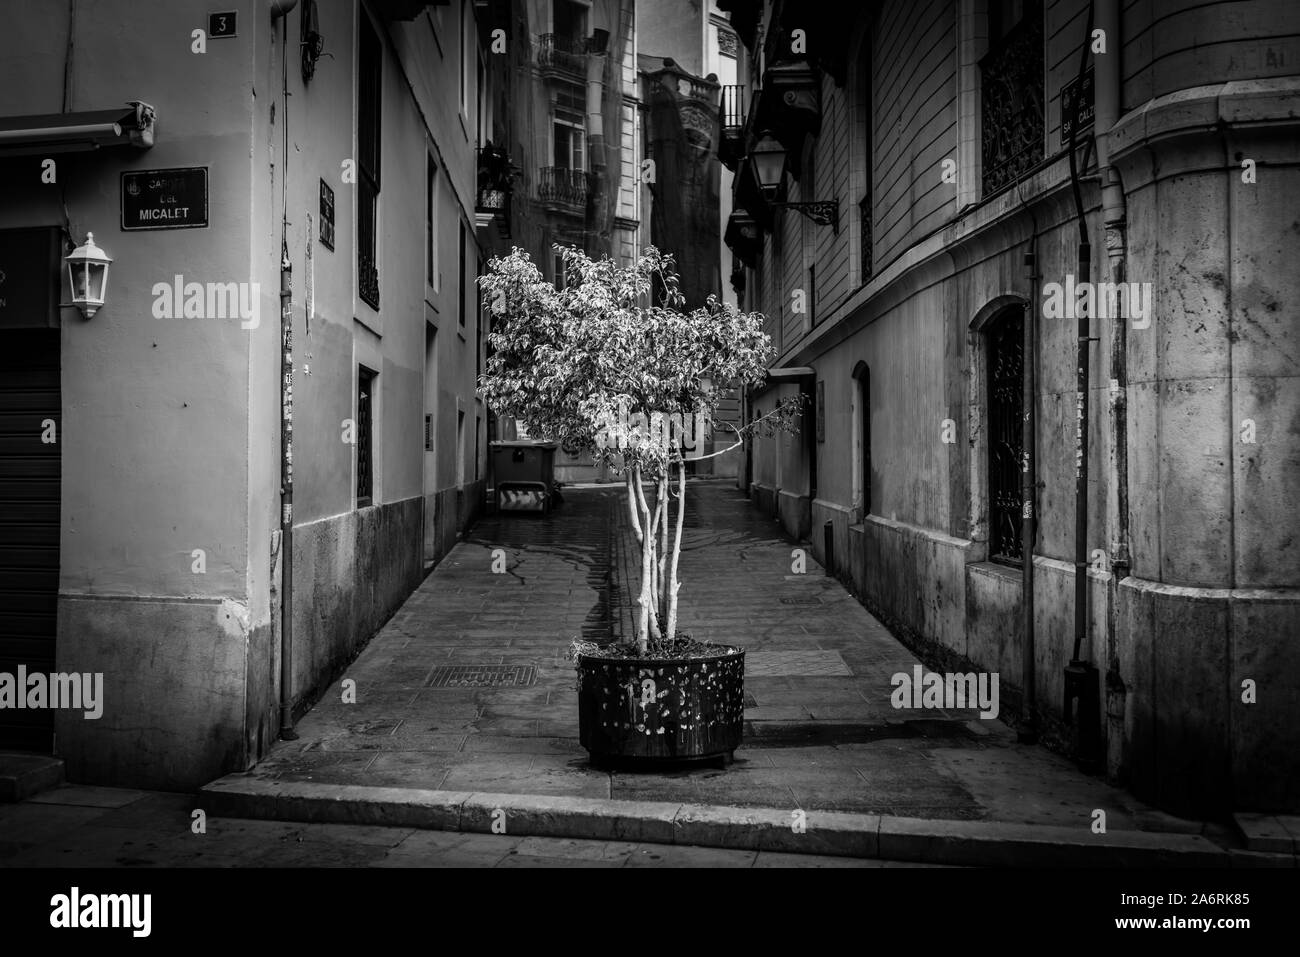 Tree growing in an urban environment in a pot on a narrow street between old buildings. Valencia Old Town, Spain. Stock Photo